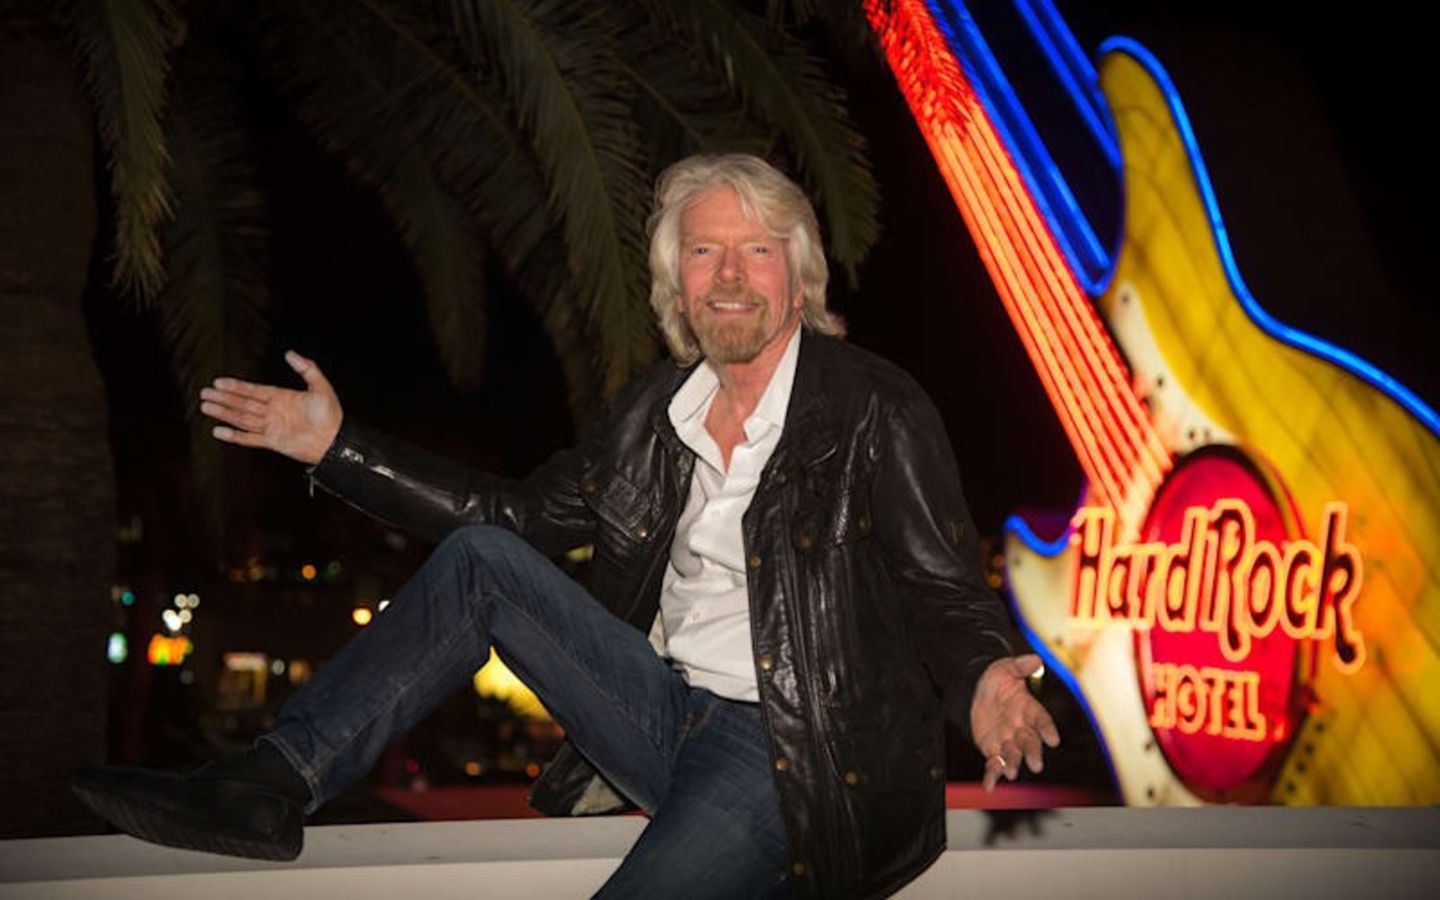 Richard Branson at the Hard Rock Hotel, which is set to become Virgin Hotels Las Vegas